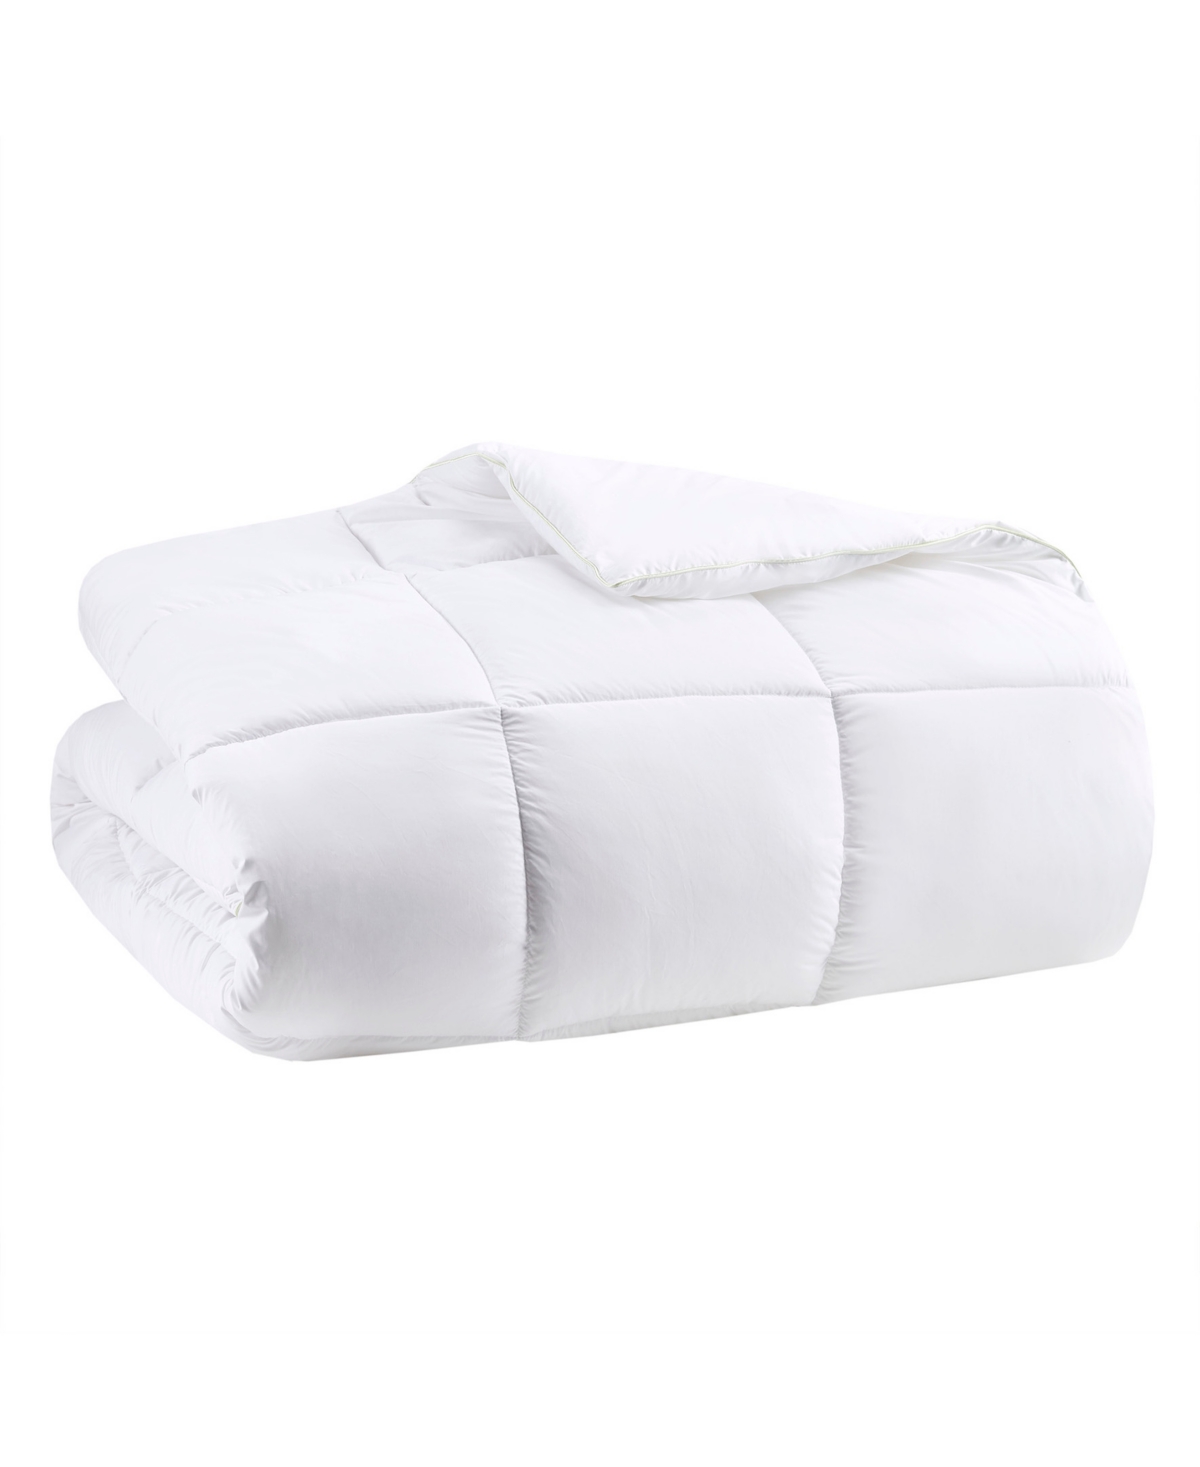 Clean Spaces Allergen Barrier Microbial Resistant Down-alternative Comforter,, King In White